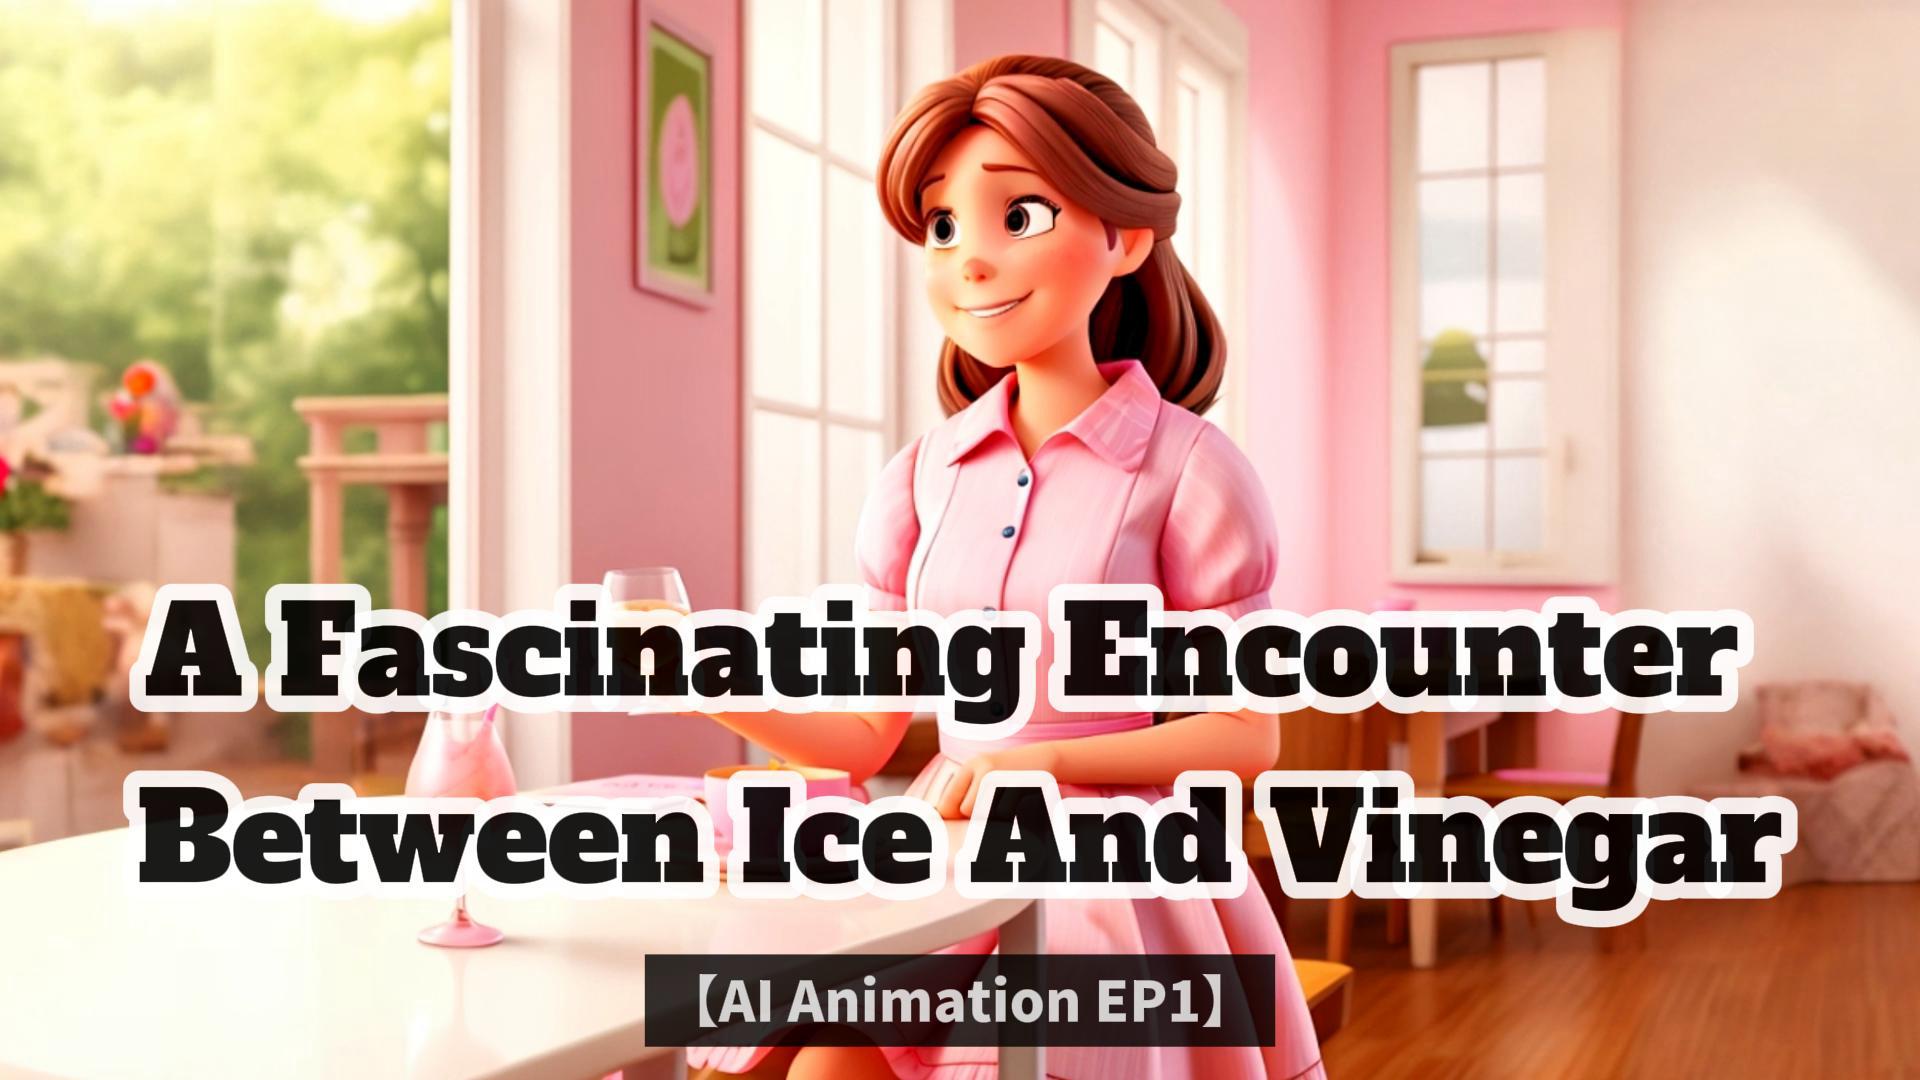 A Fascinating Encounter Between Ice And Vinegar